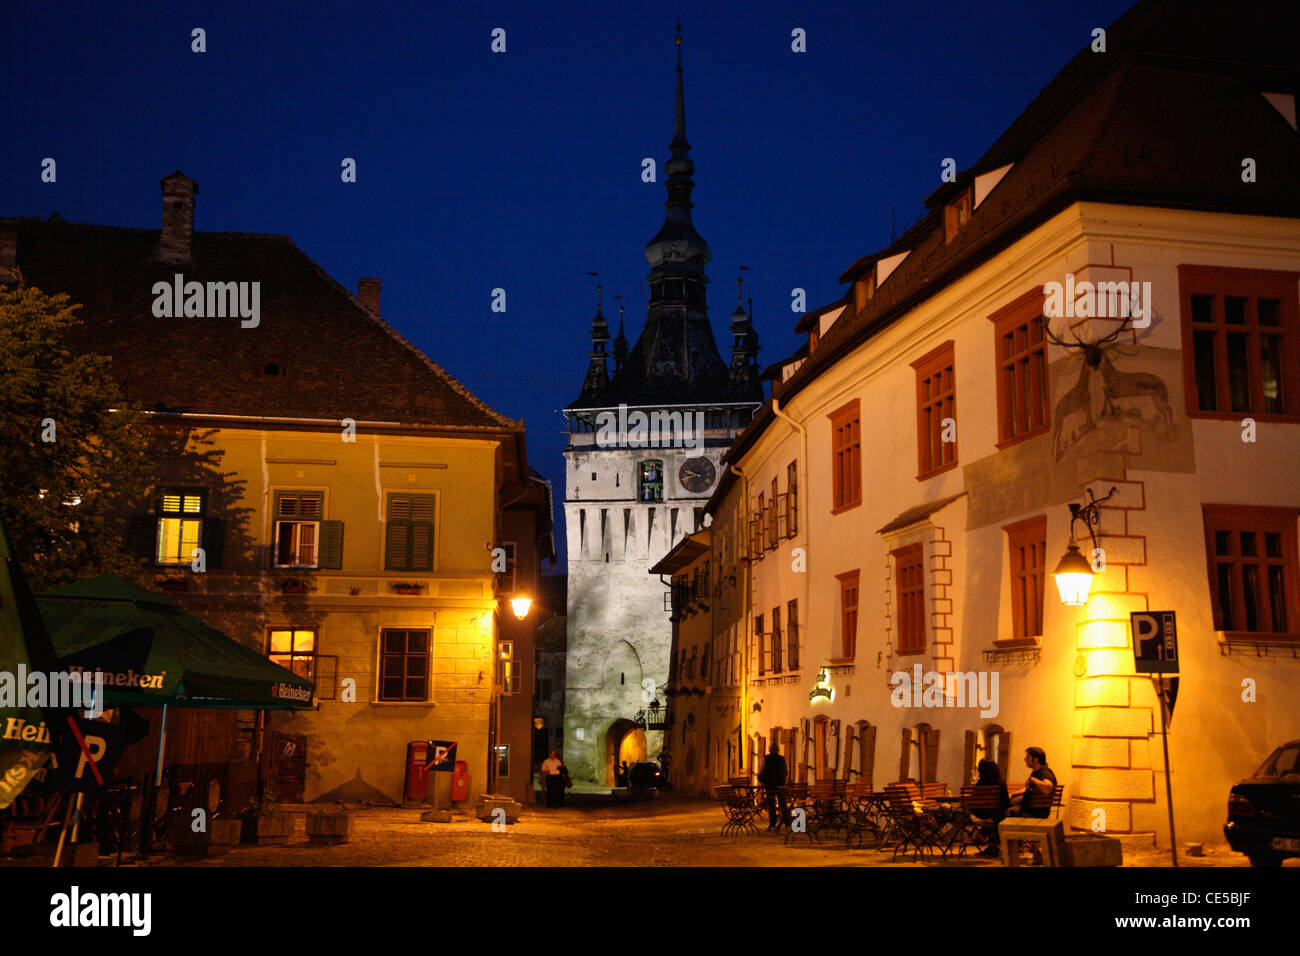 Europe, Romania, Sighisoara, The night view of the Citadel Square with the Clock Tower in the background Stock Photo